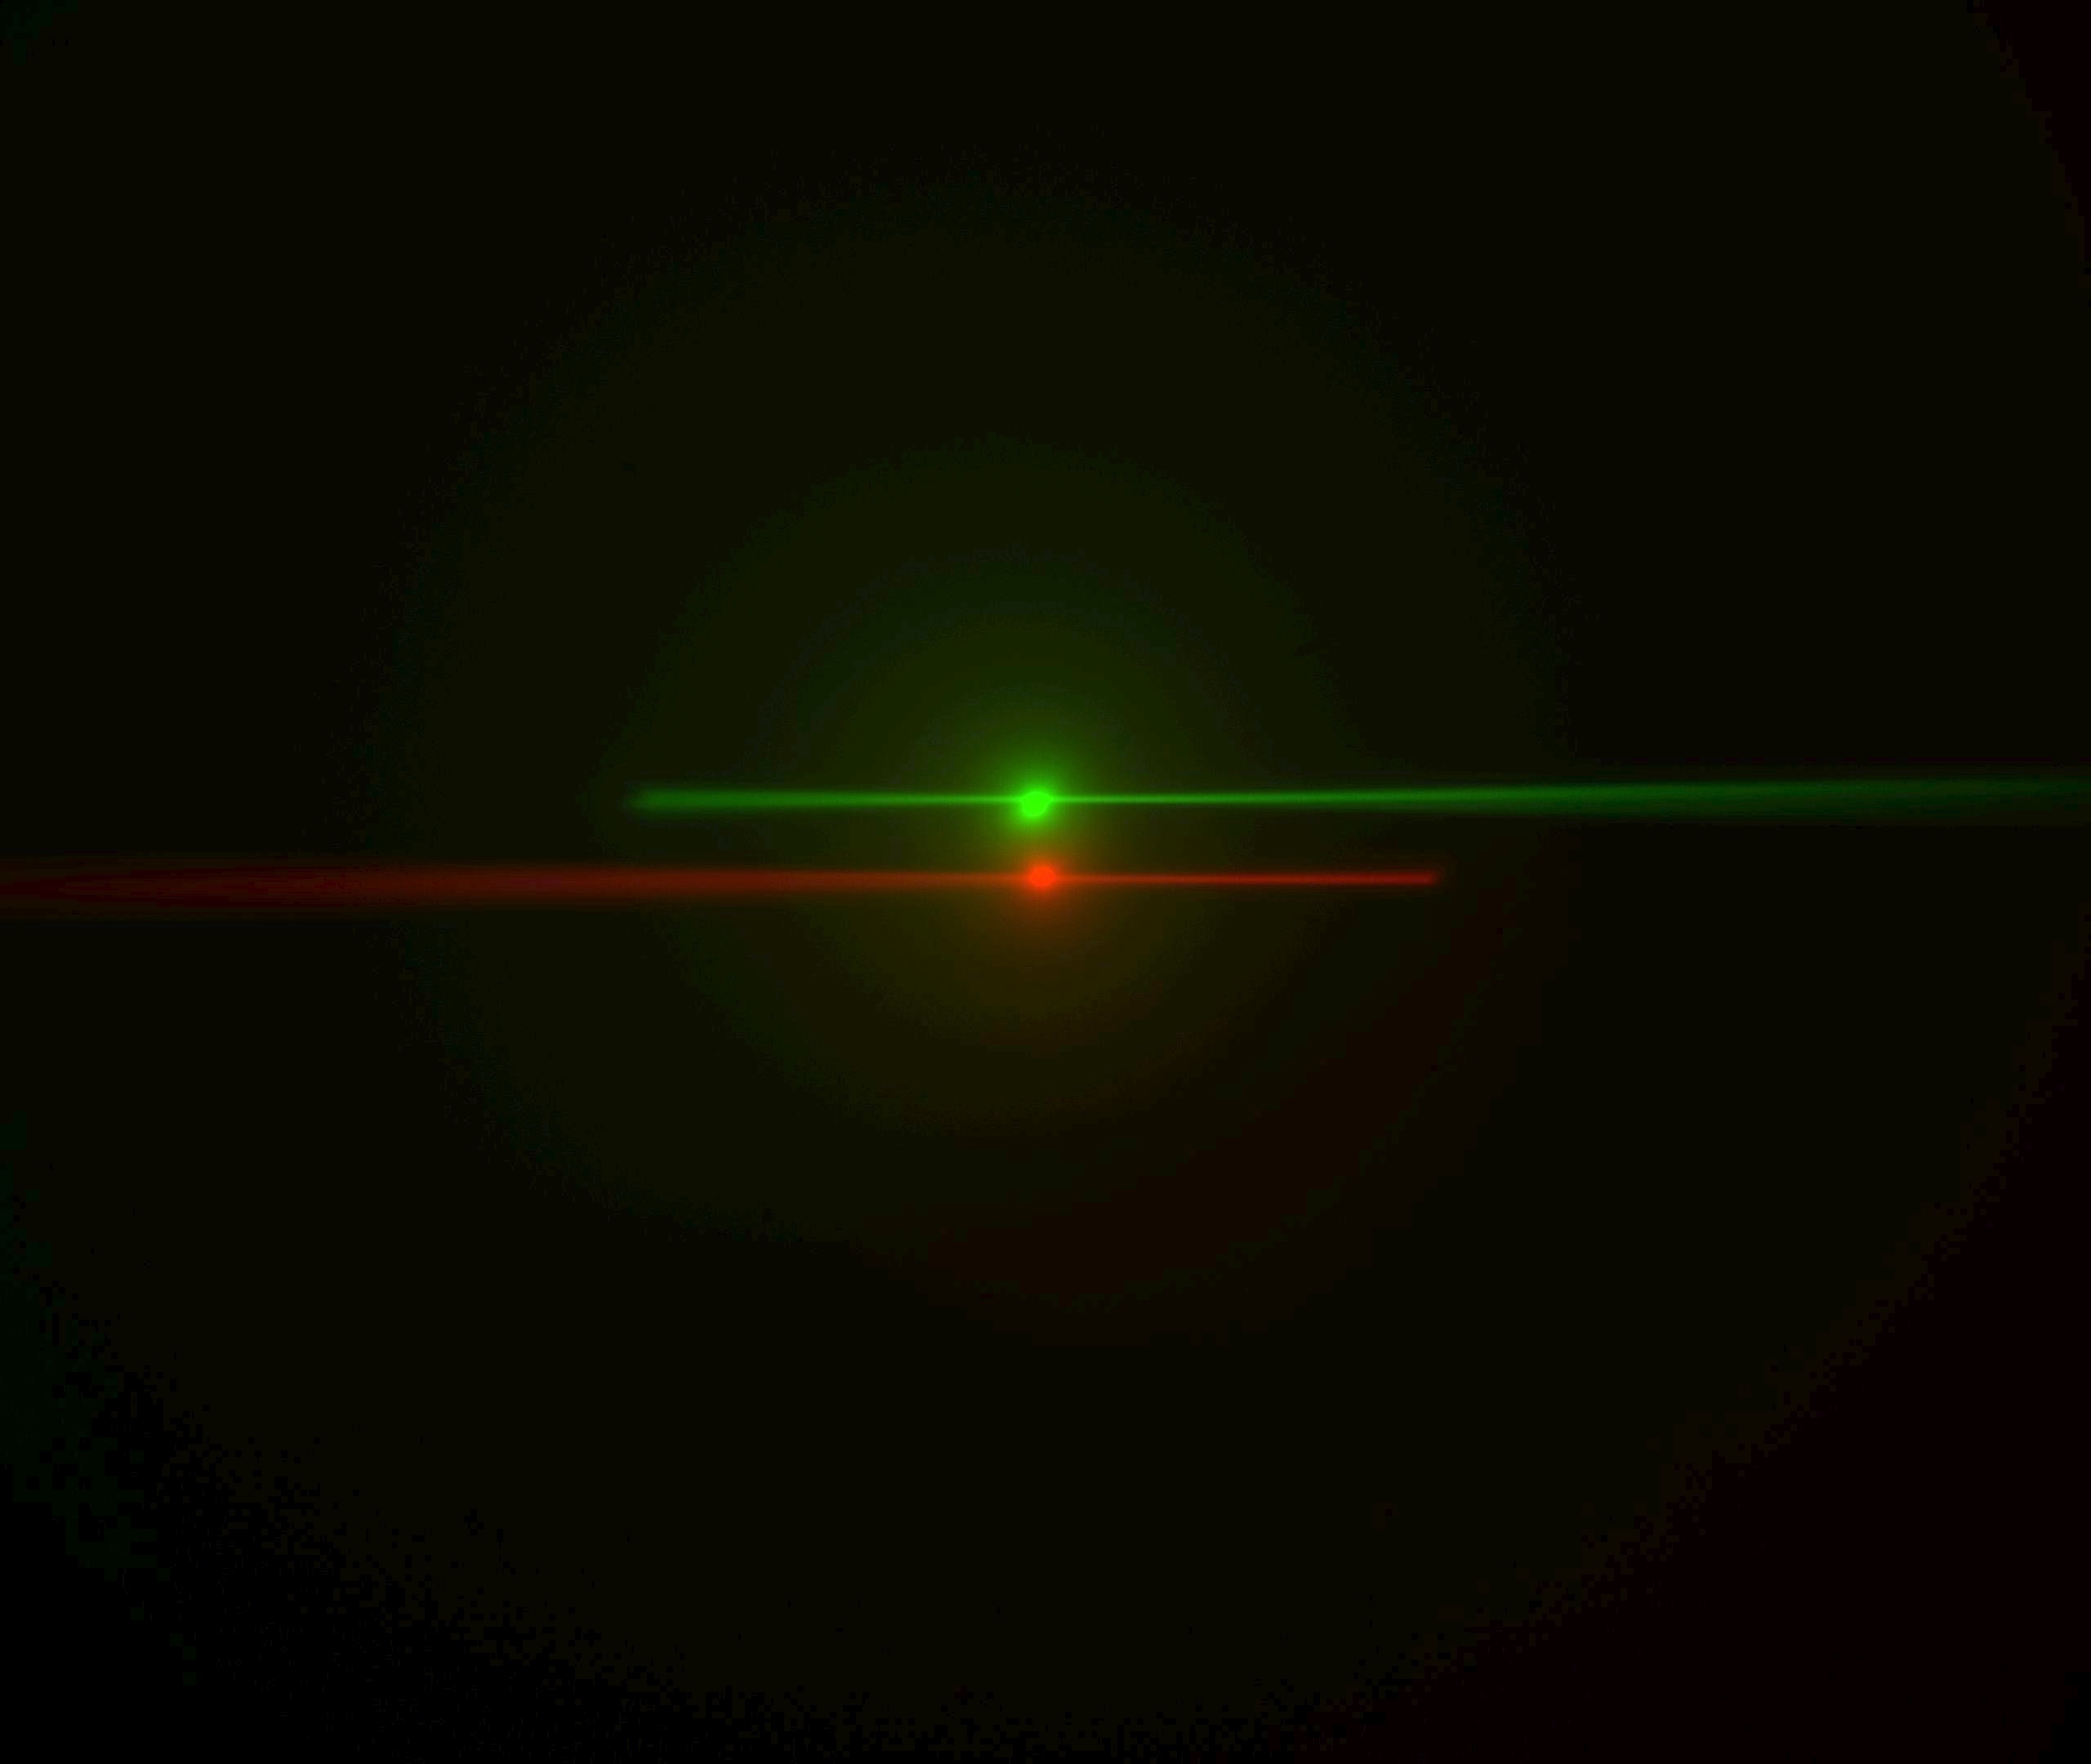  Laser beams seen by cameras in conventional orientation. The green image is from the left-side camera and shows the beam from the right-side scanner entering from the right and eventually stiking the coverslip where it stops. The red image is from "Path A" (the right-side camera and left-side scanner) with the beam entering from the left. The bright spots are the epi-fluorescent excitation from the scanner on the same side as the respective cameras. The following statement will be understood after going though the alignment: the objective lateral alignment is perfect because the epi and beams exactly overlap, but the camera mirrors need to be adjusted slightly to put both epi spots in the image center.